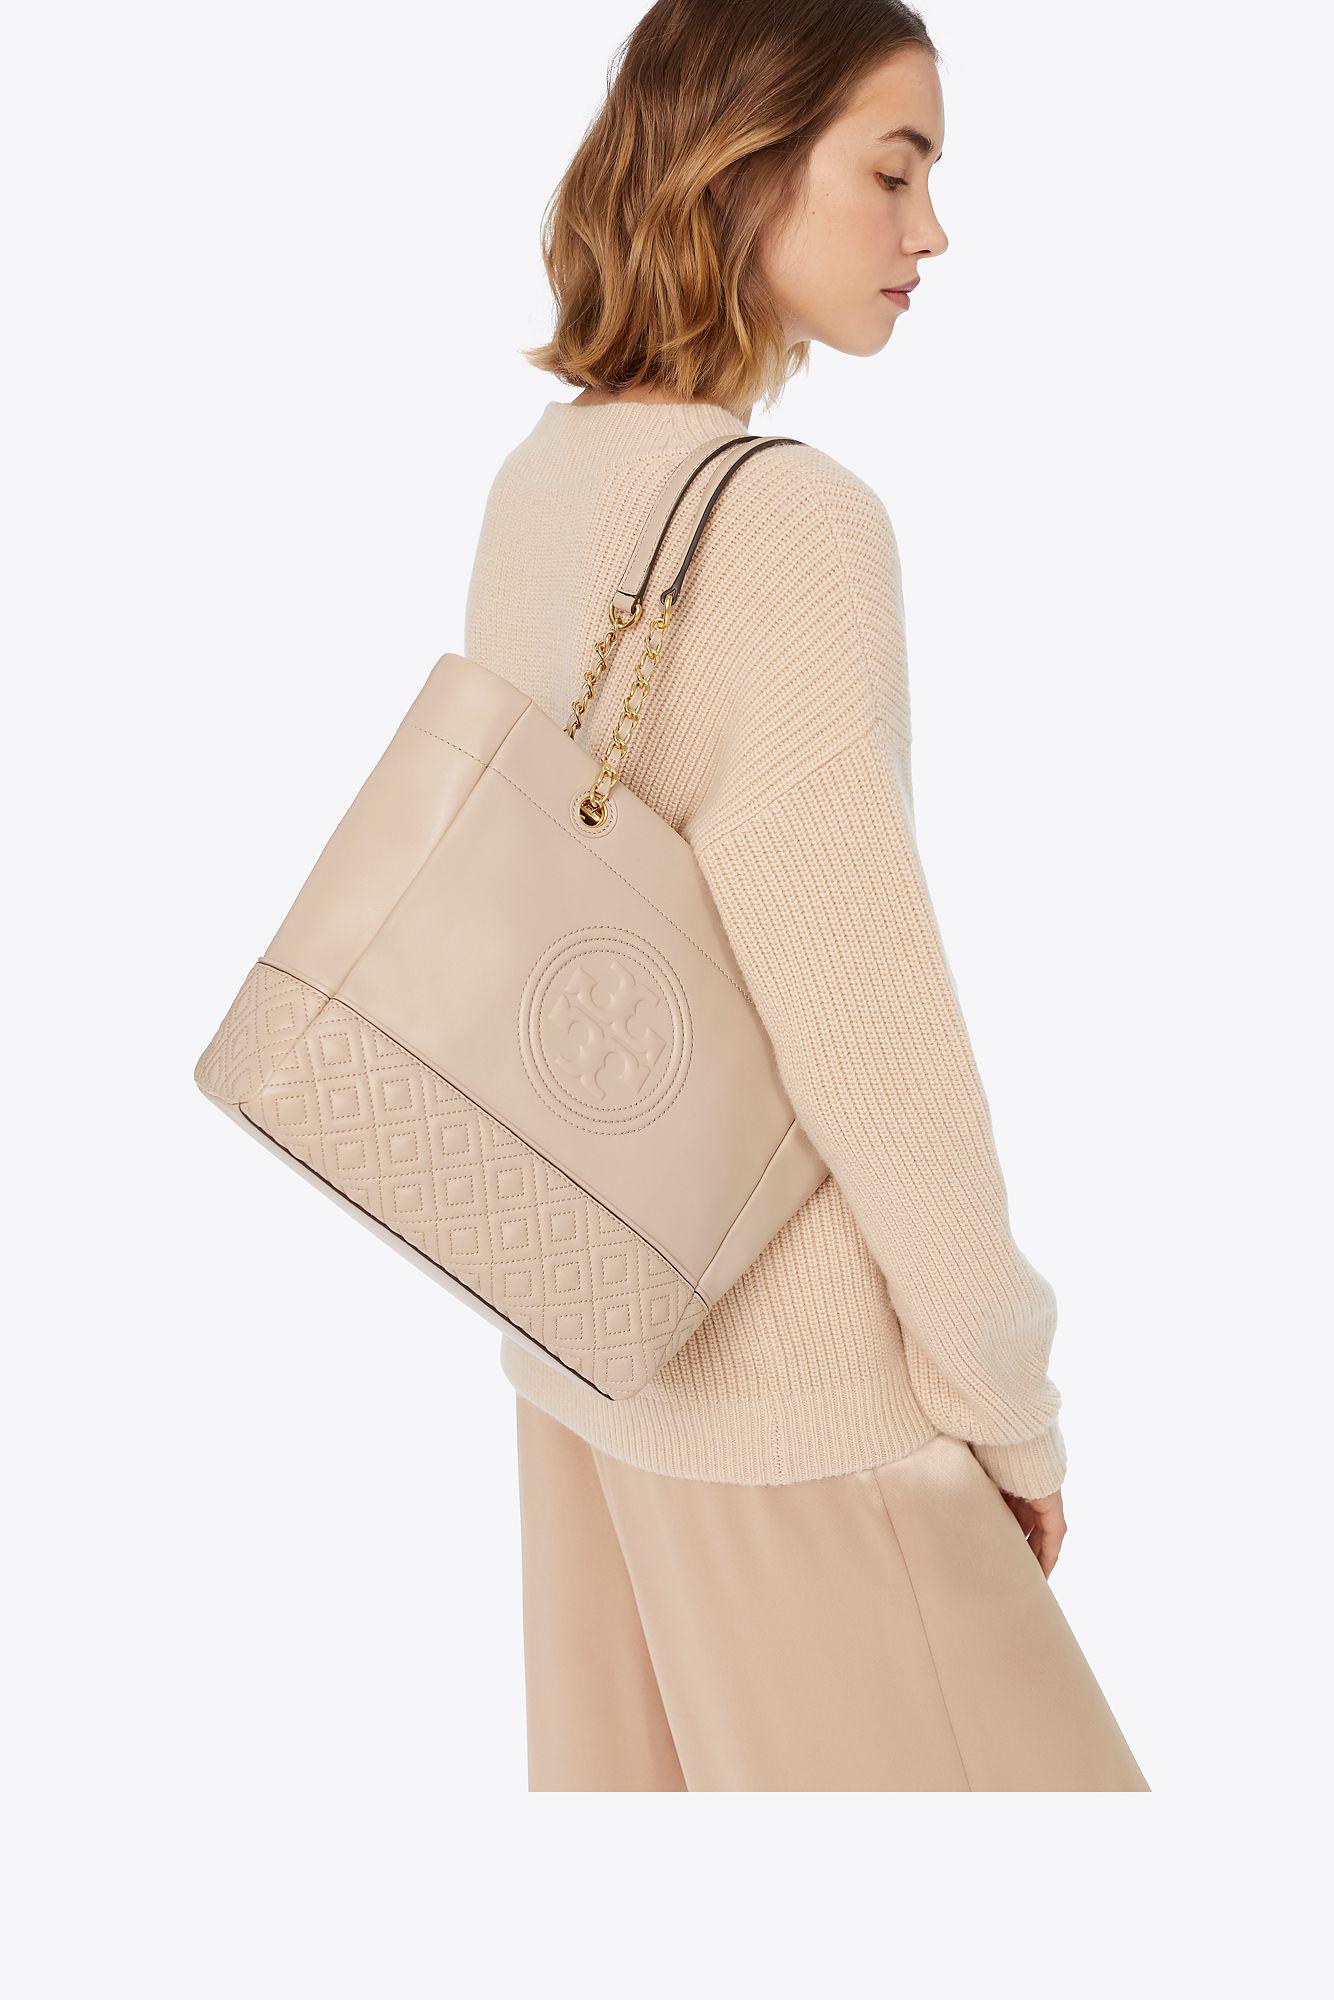 Tory Burch Leather Fleming Tote in Light Taupe (Natural) | Lyst